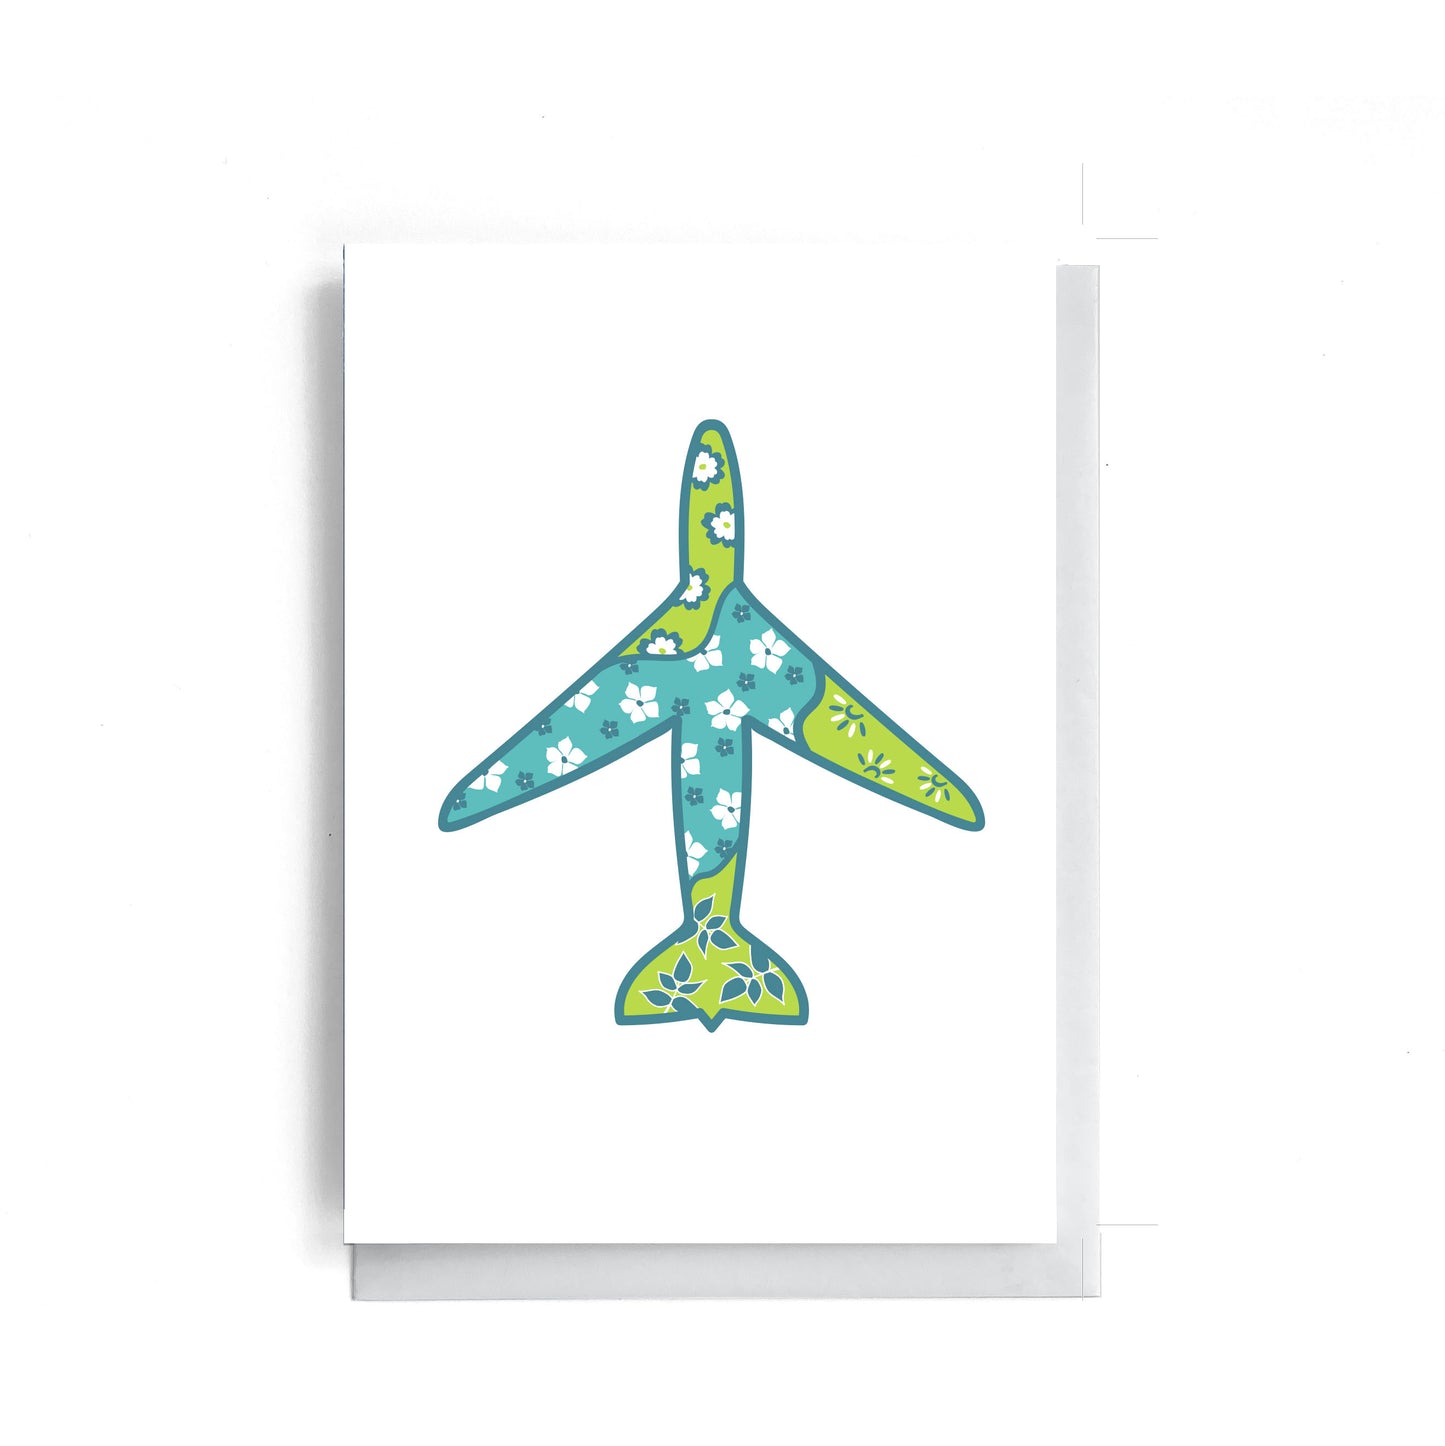 Greeting card on a white surface. On the greeting card there is a floral patterned airplane.